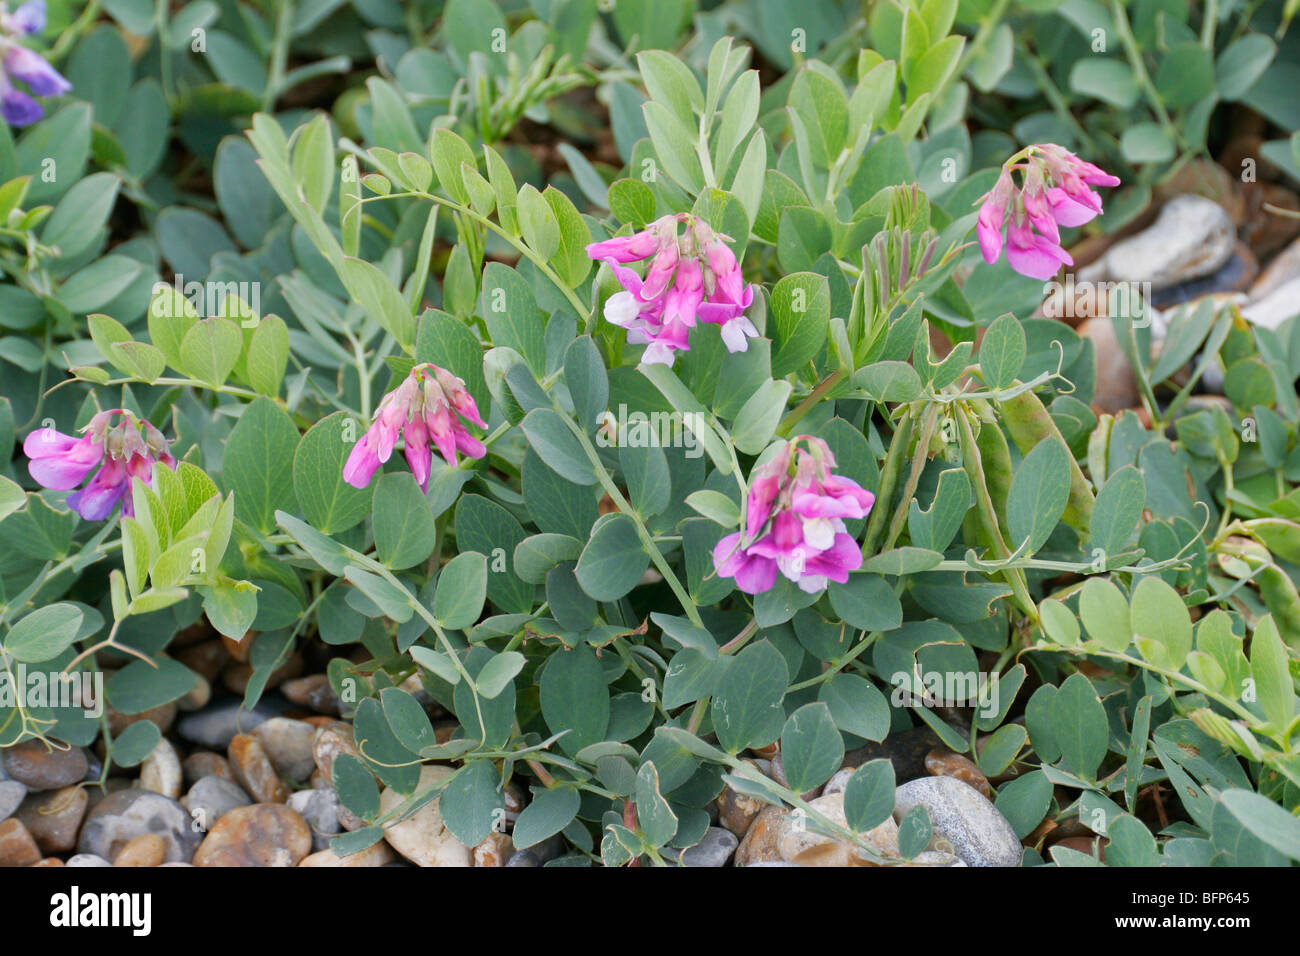 The nationally rare Sea Pea, Lathyrus japonicus, growing on a beach in Suffolk, England Stock Photo